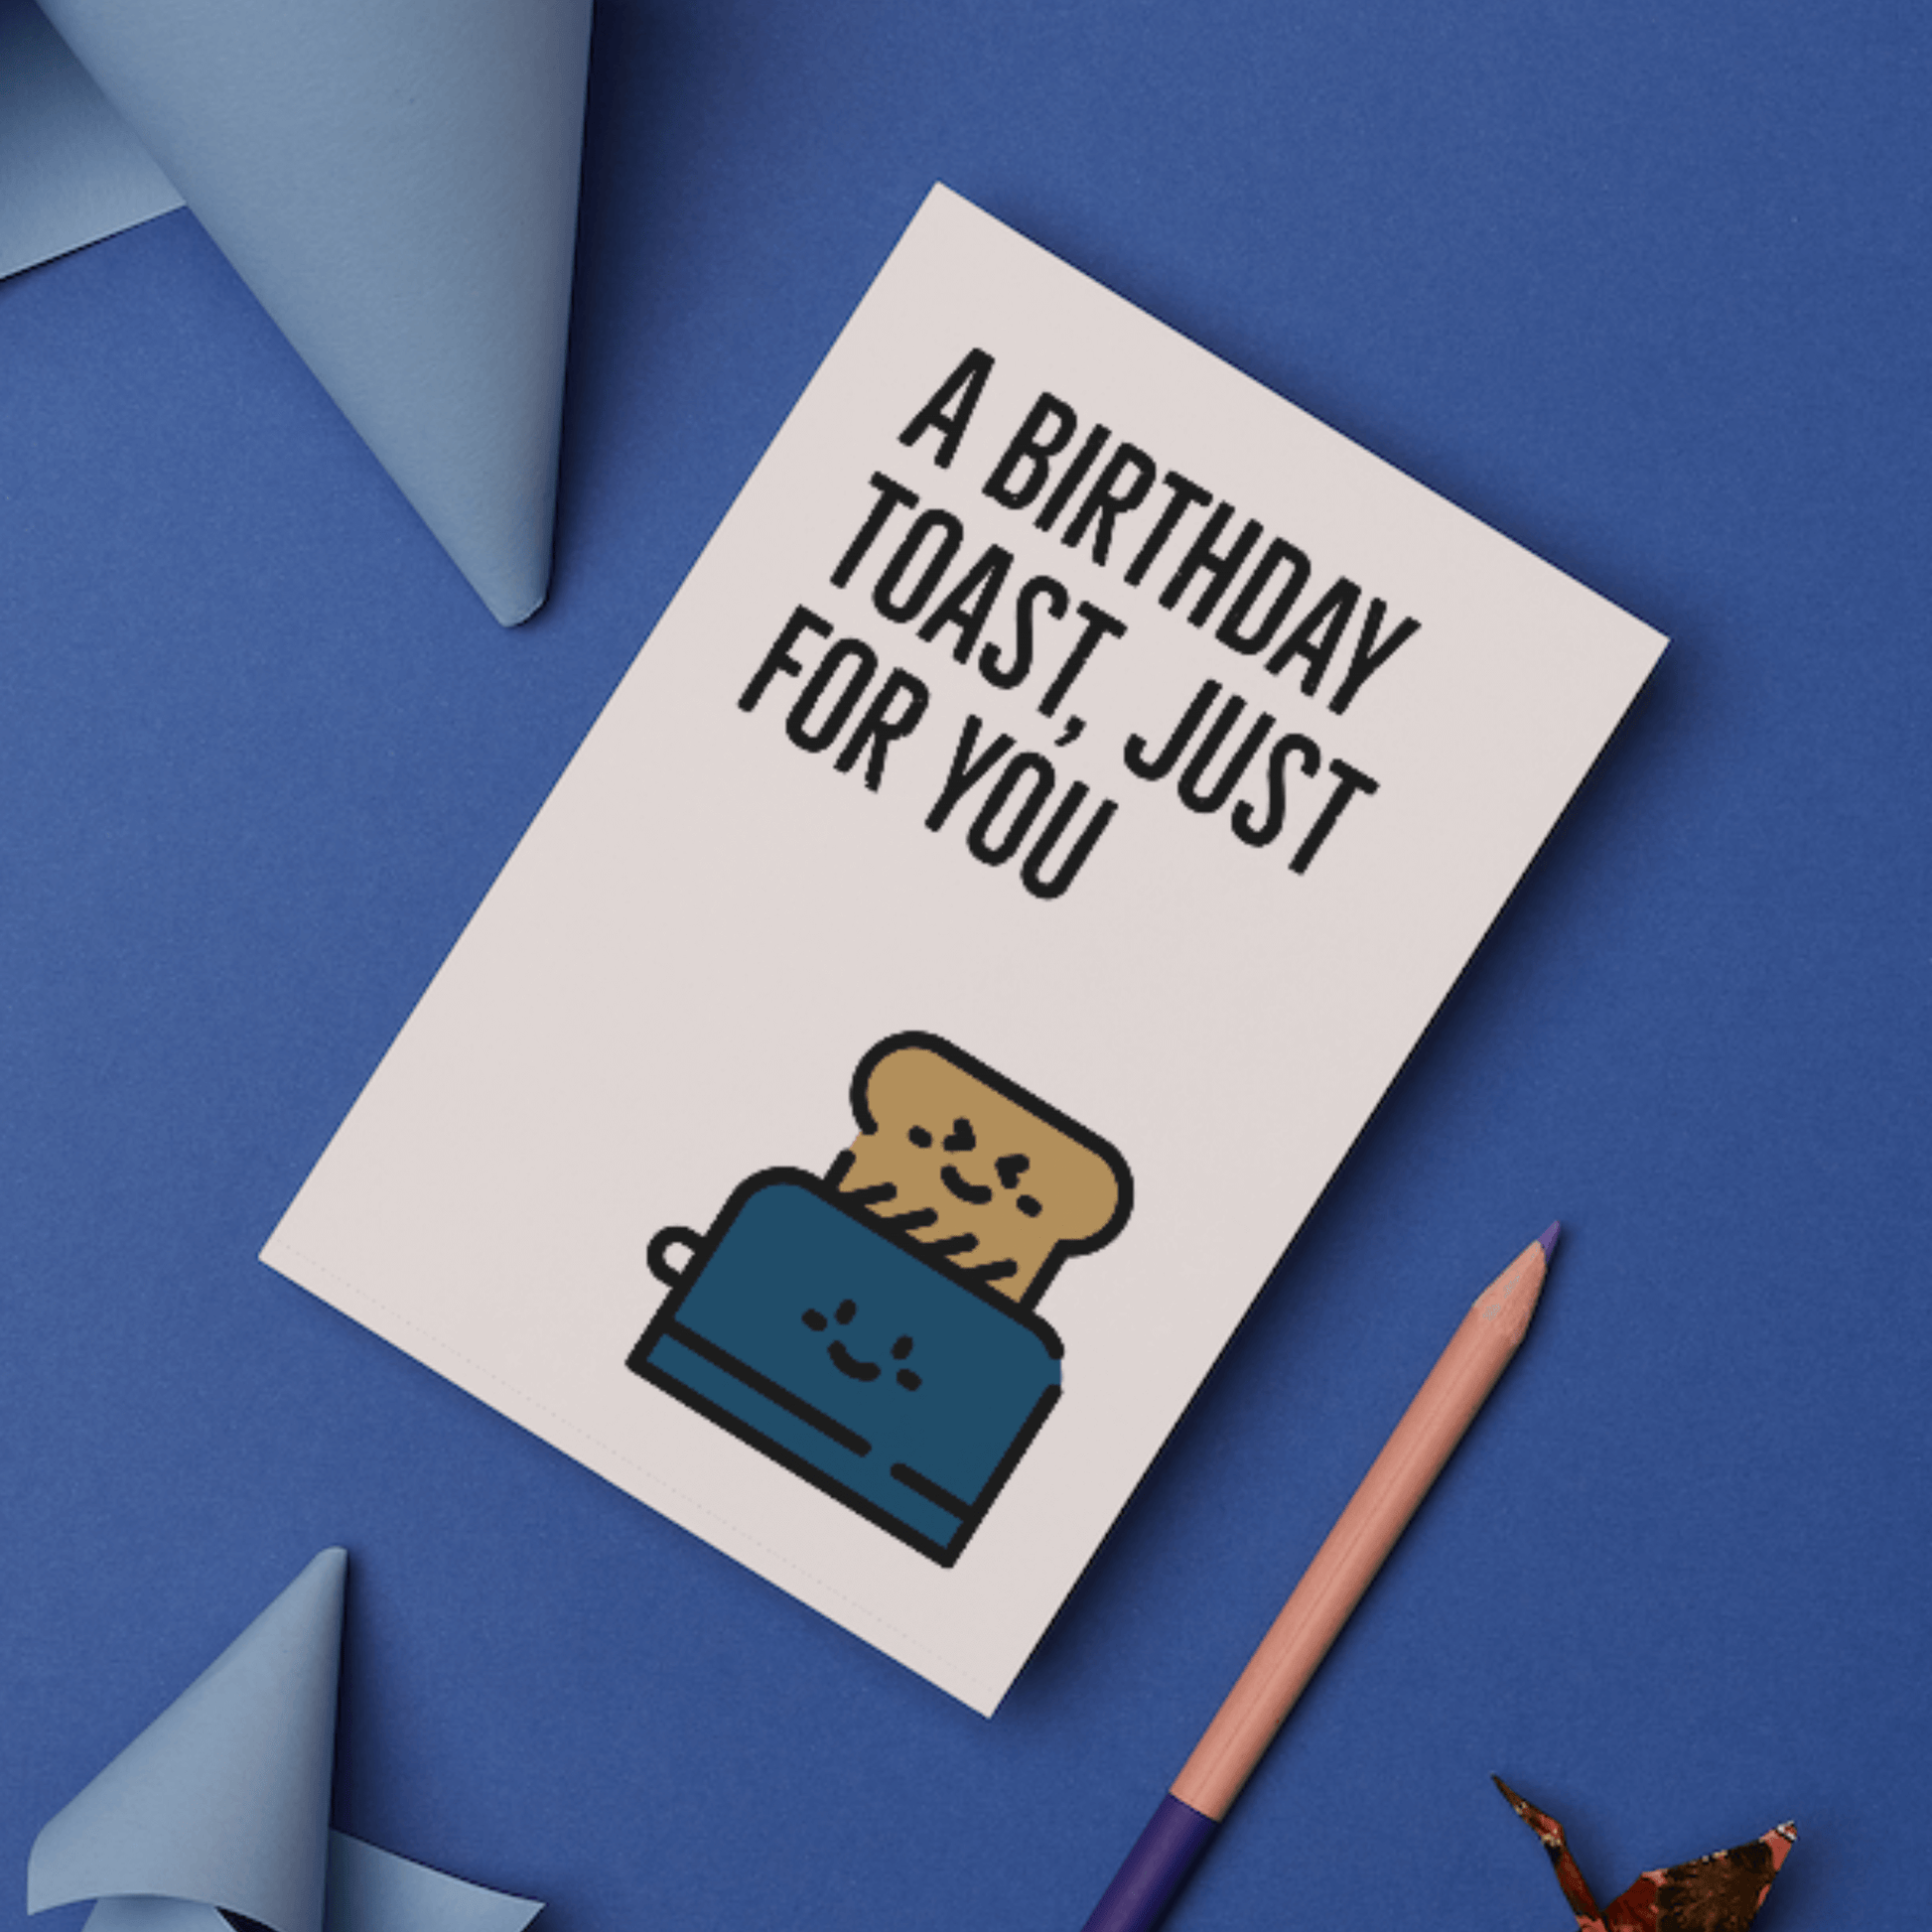 Little Kraken's A Birthday Toast, Just For You Funny Birthday Card, for £3.50 each